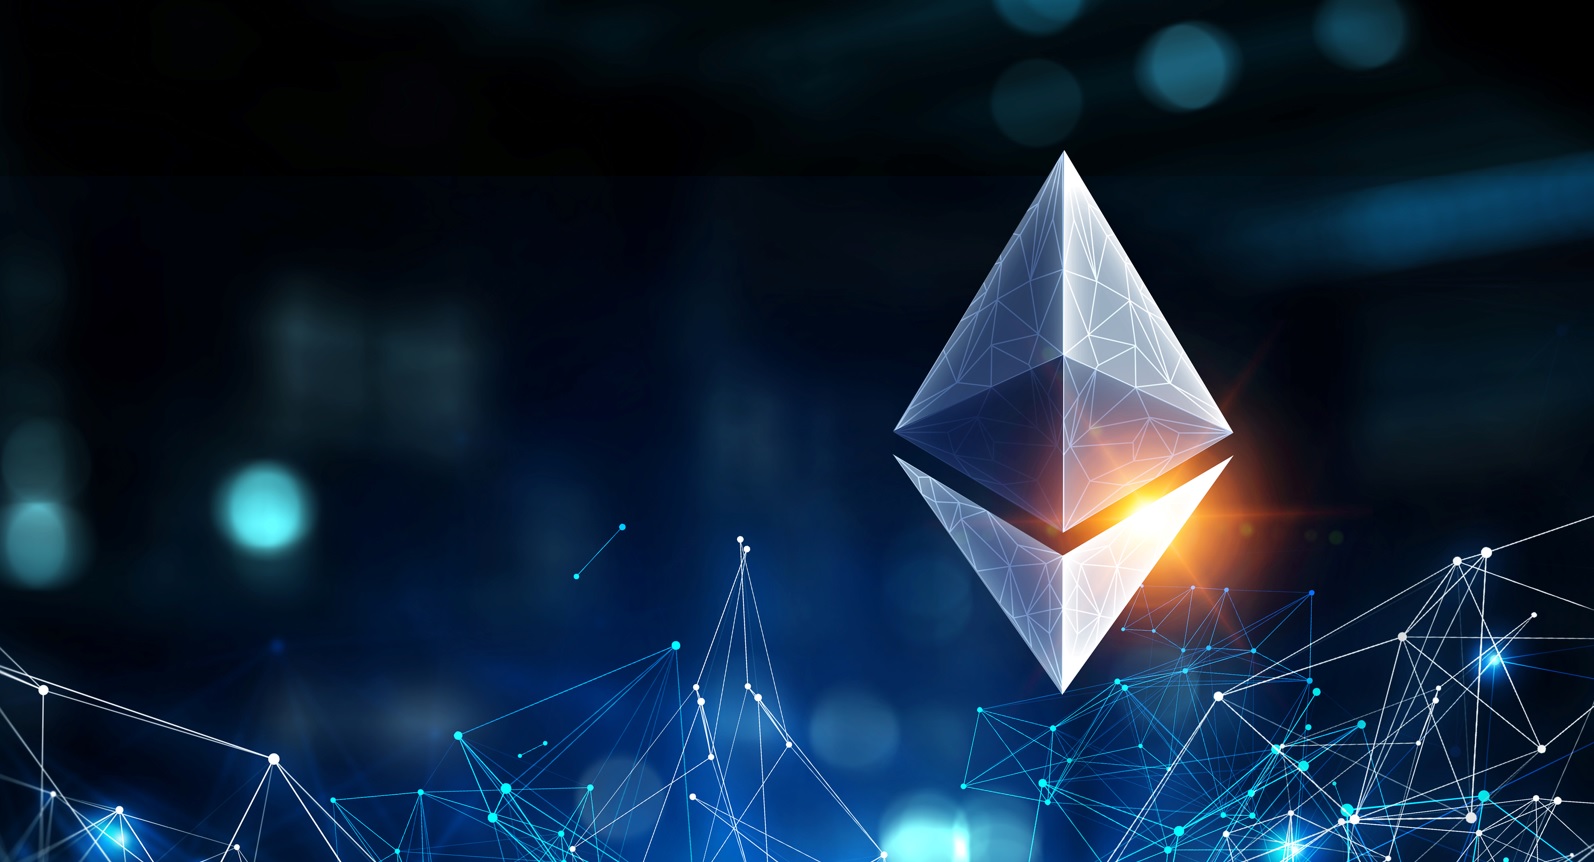  ethereum price 2022 may prediction coin journal 